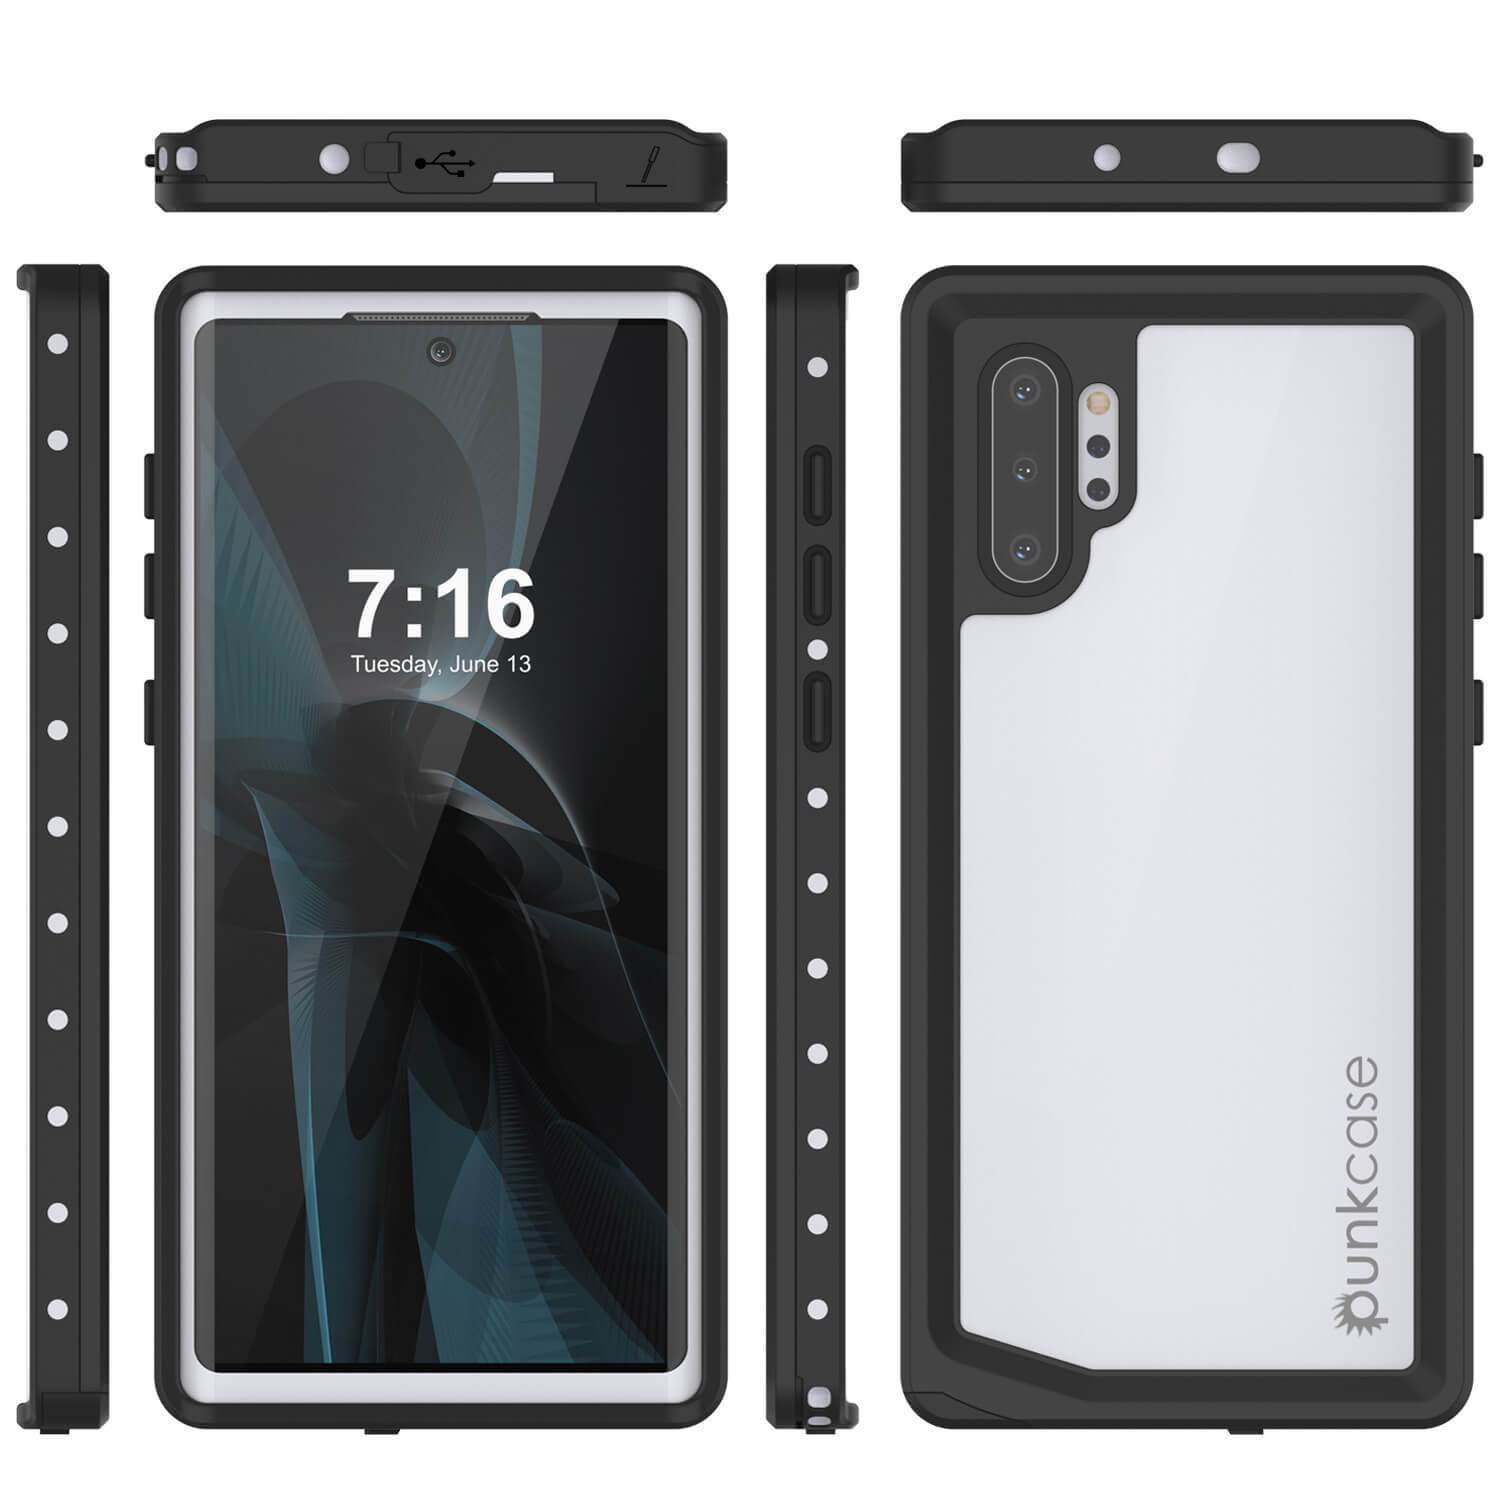 Galaxy Note 10+ Plus Waterproof Case, Punkcase Studstar White Thin Armor Cover